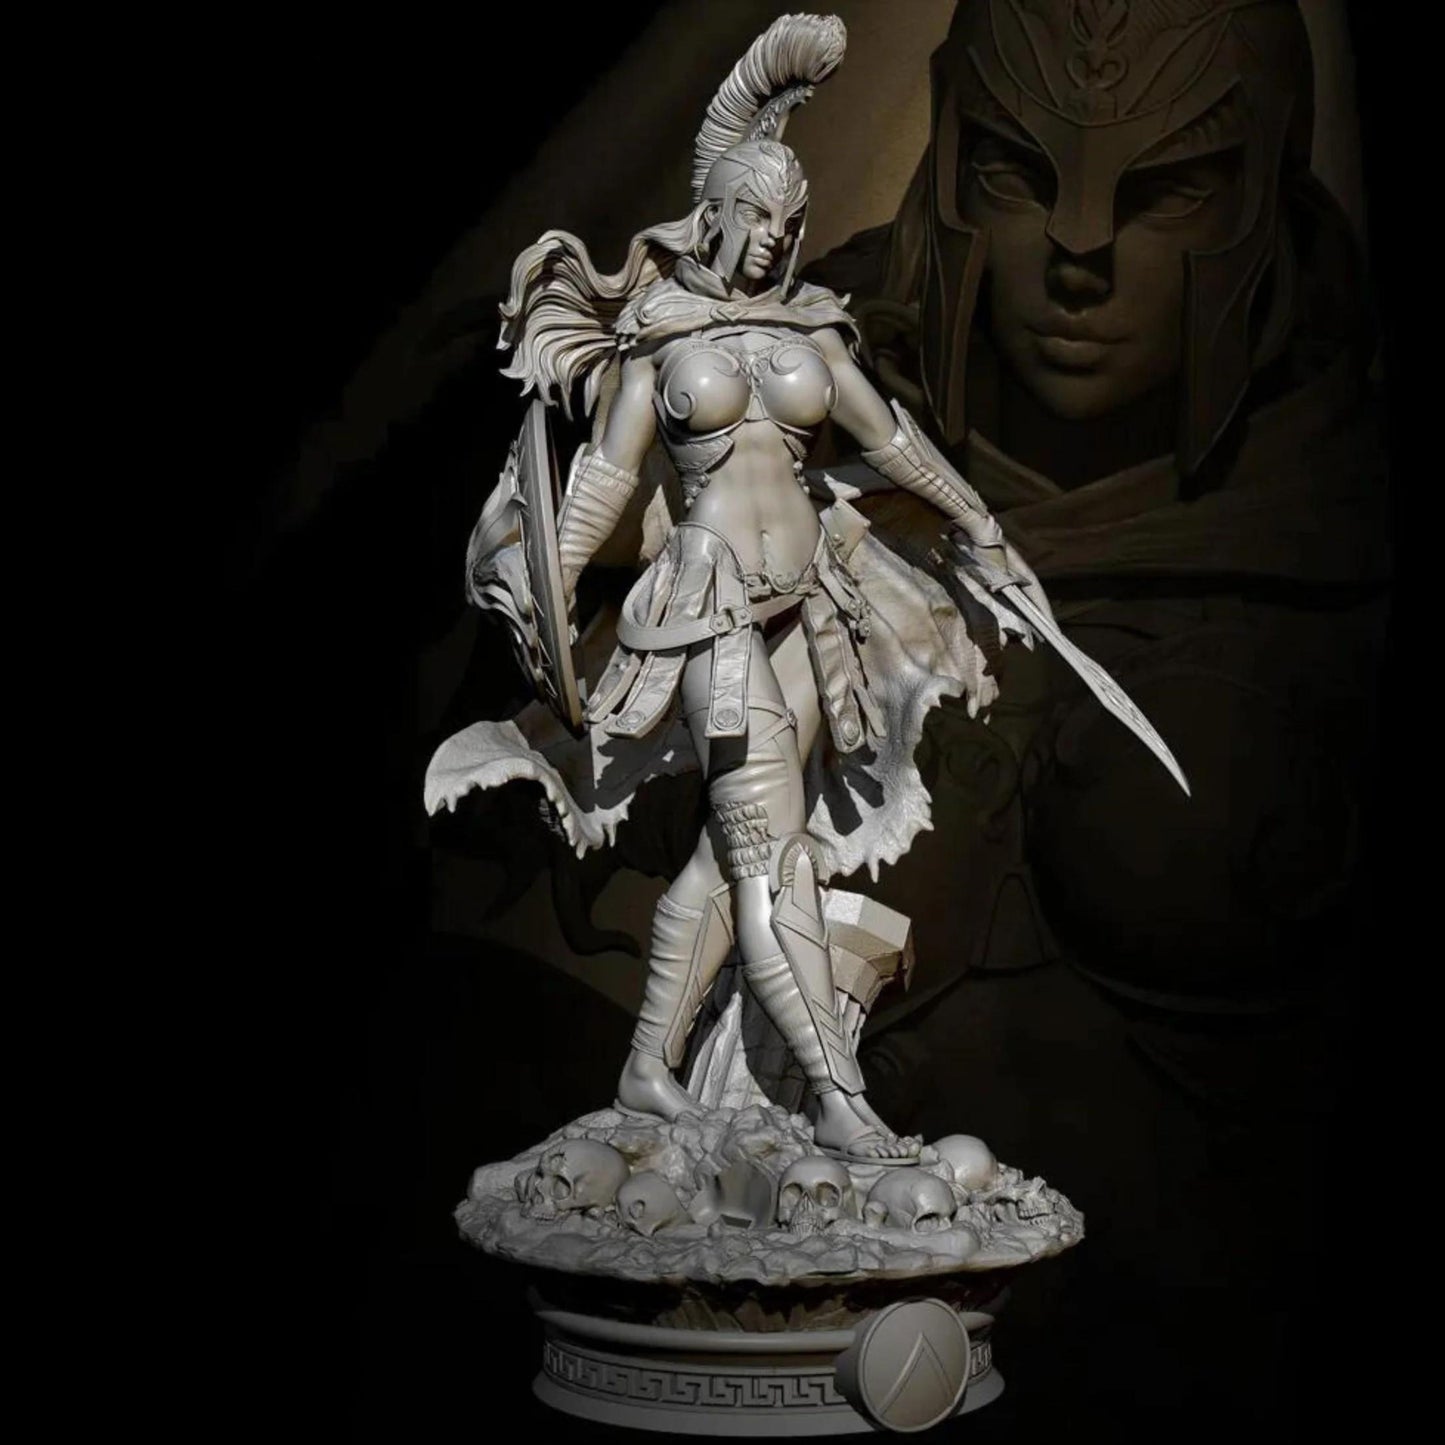 18+ Collector's 3D Printed Model: 1/24 Resin model kits DIY figure toy beauty self-assembled.